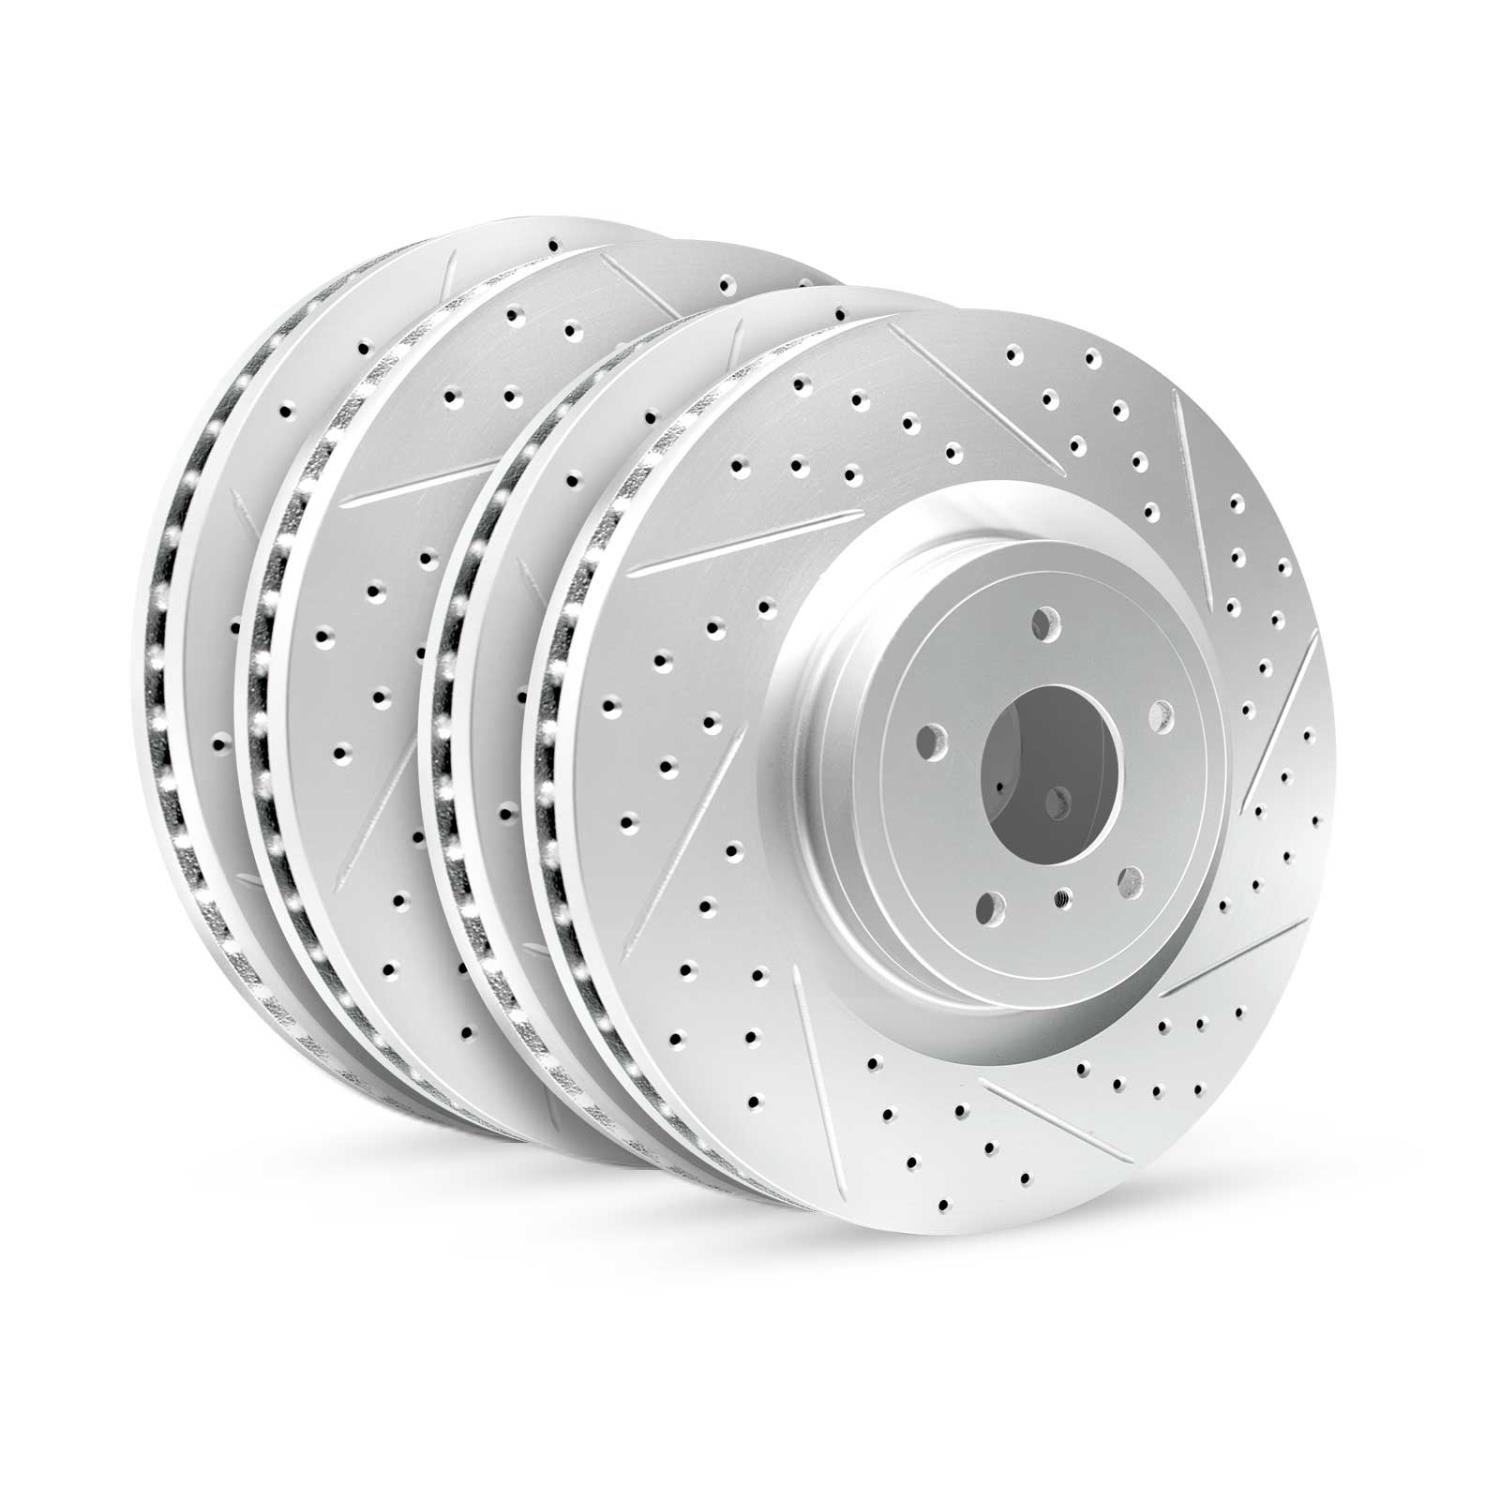 GEO-Carbon Drilled/Slotted Rotors, 2005-2012 Ford/Mazda,